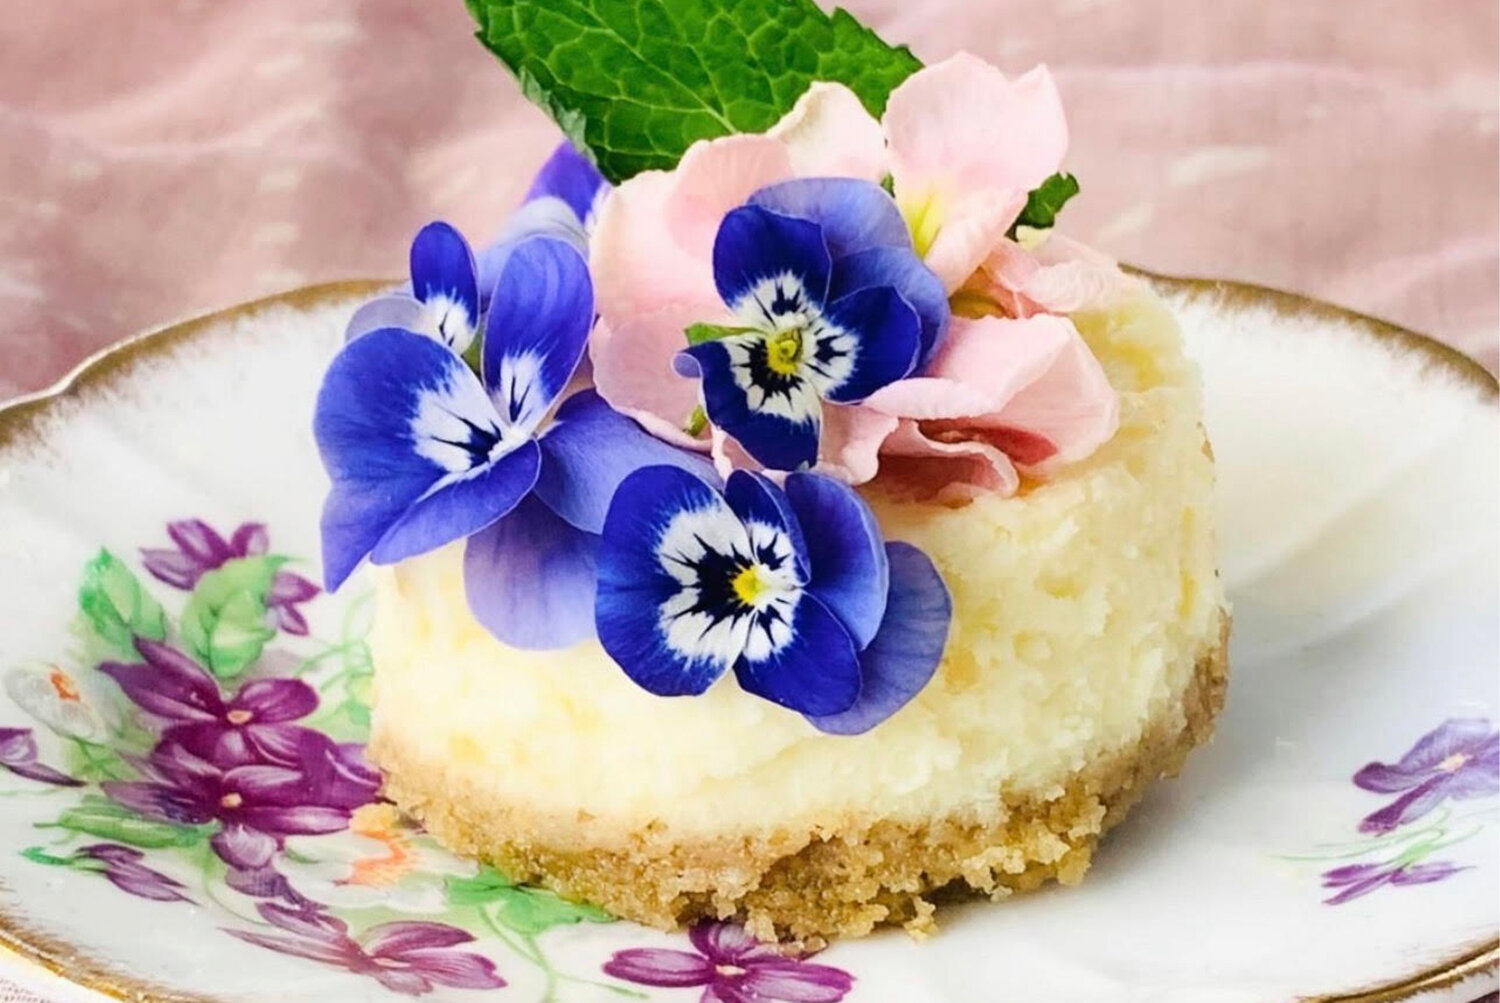 Tip: To make individual mini cheesecakes, press a biscuit cutter into your refrigerated cheesecake to form small circles.